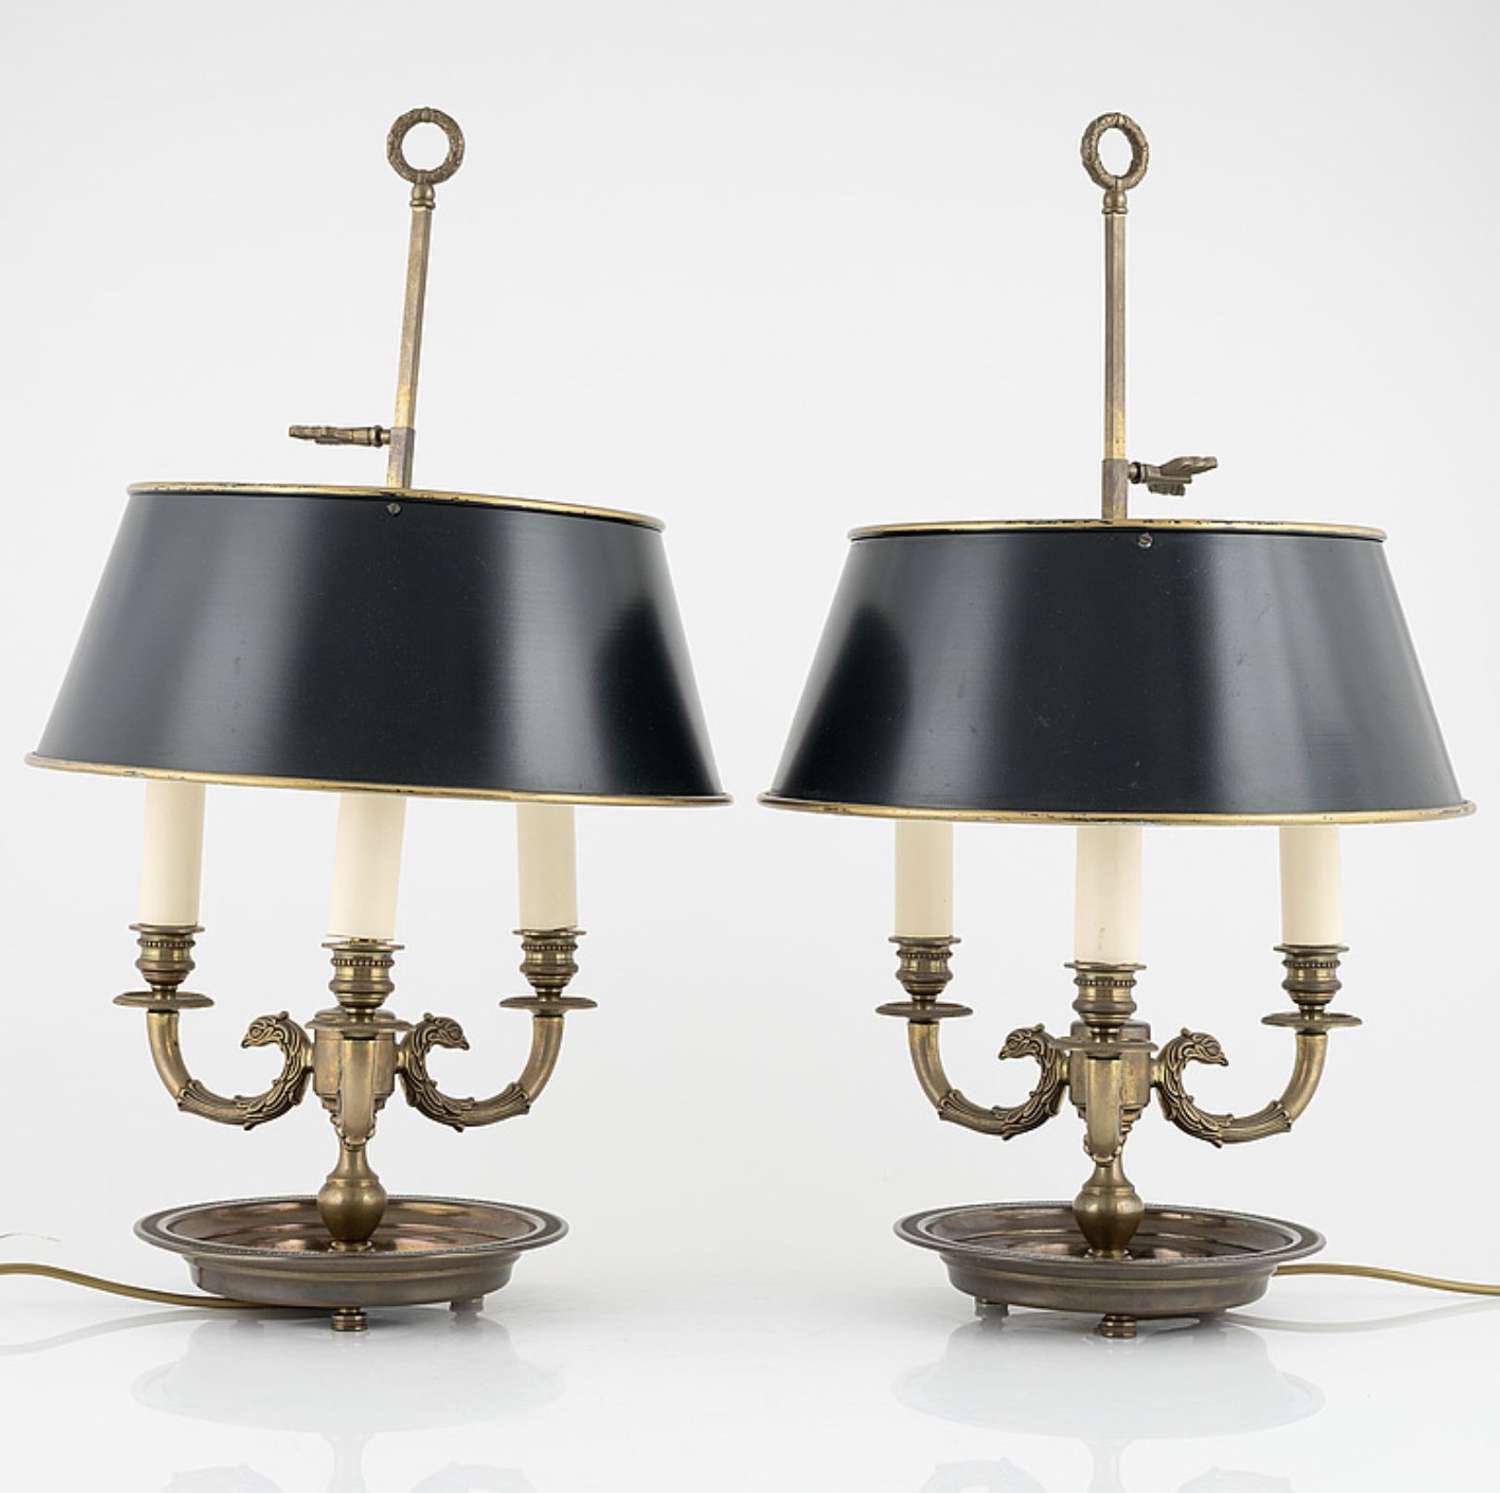 Mid 20th century pair of french style bouillotte table lamps